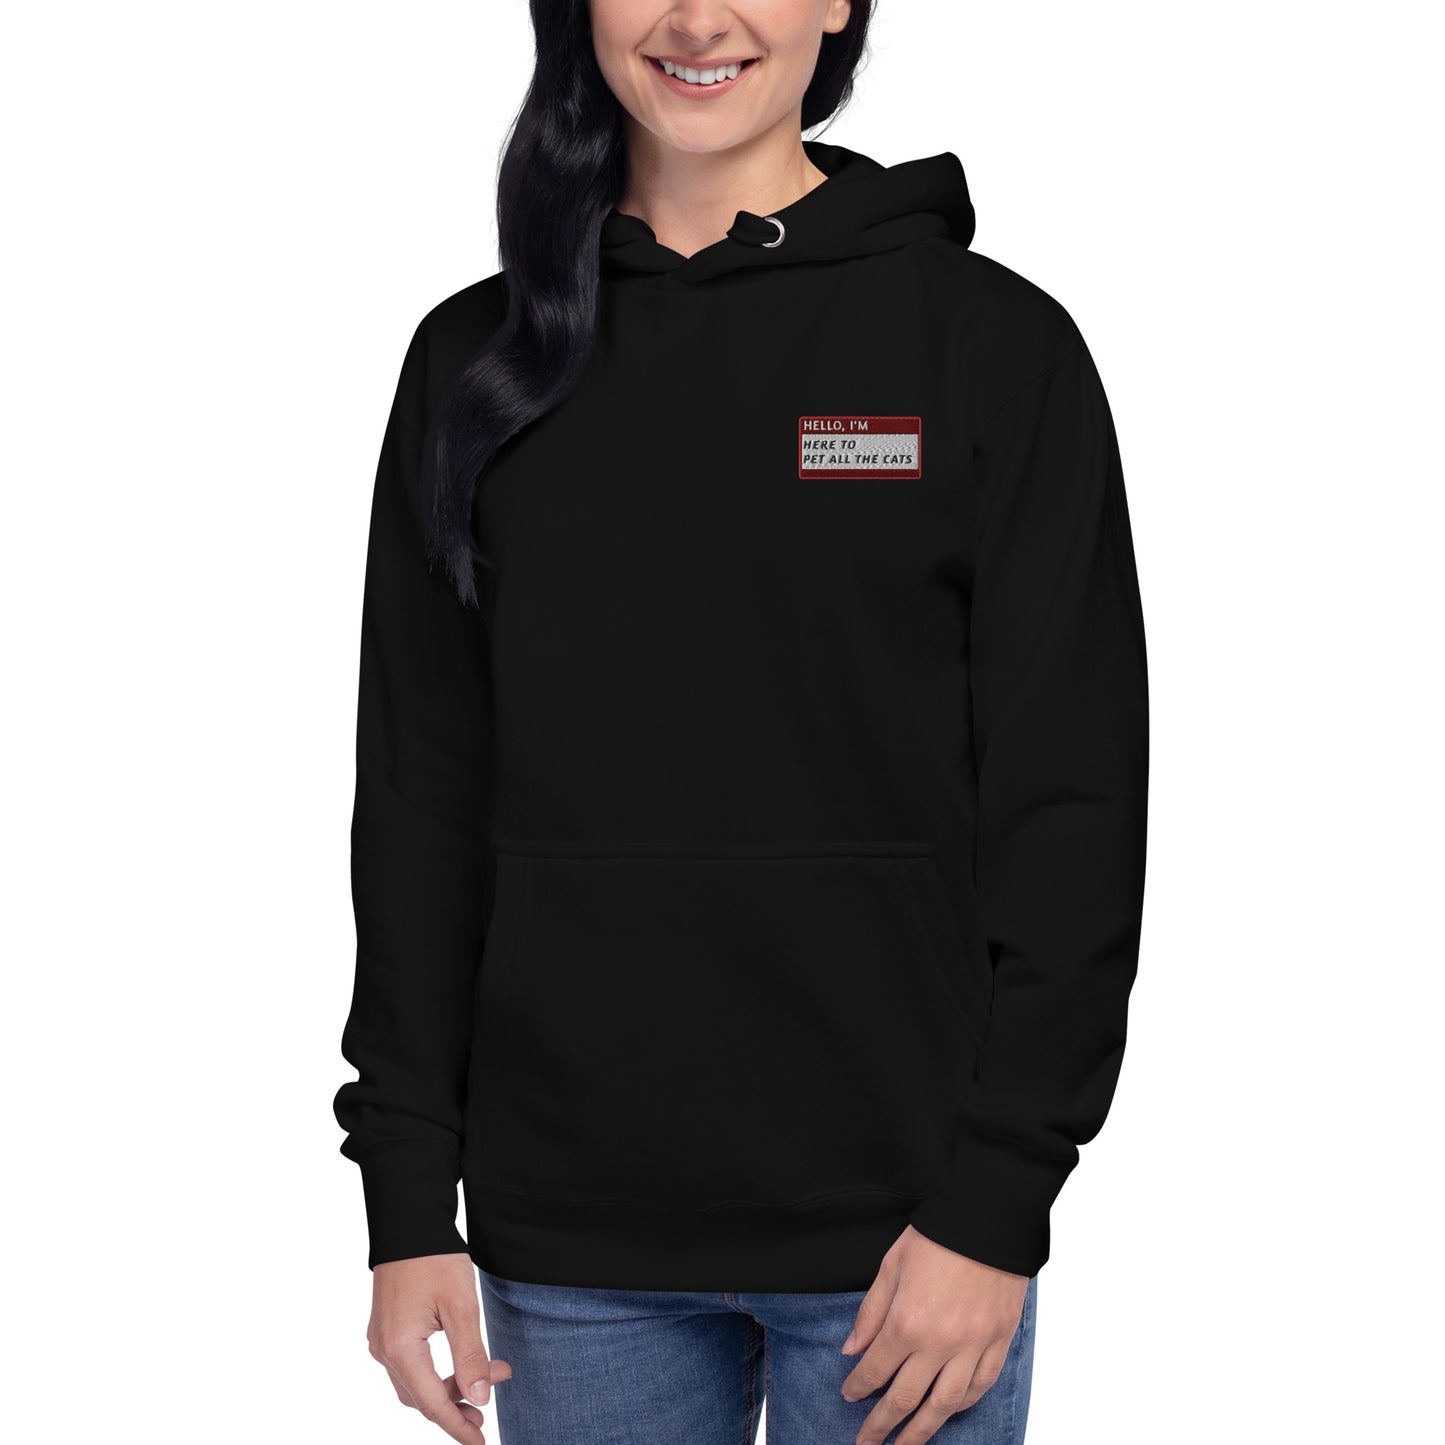 HELLO I'M HERE TO PET ALL THE CATS - Name Tag Hoodie